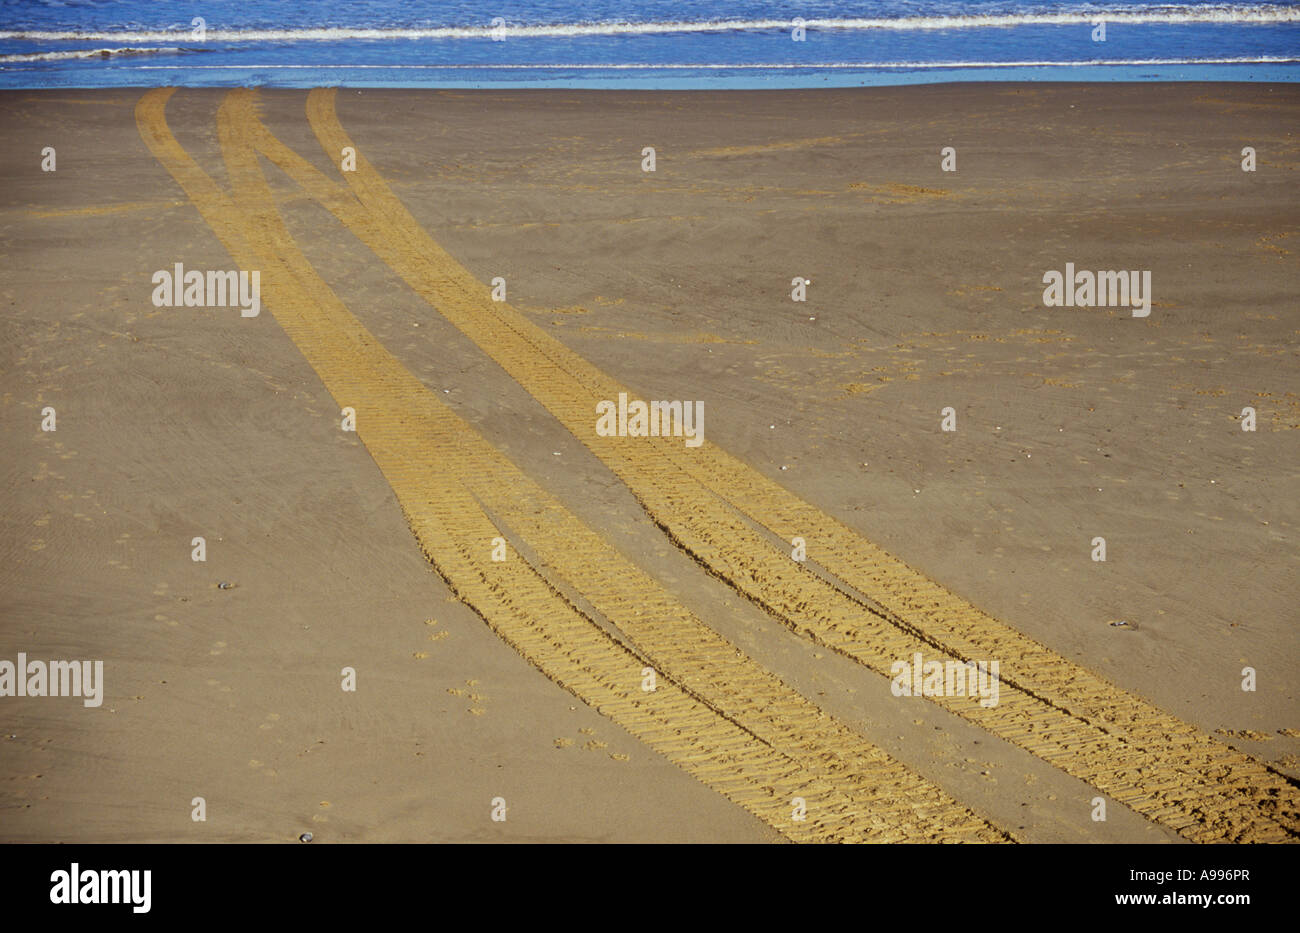 A set of tyre or caterpillar tracks crossing a clear sandy beach and disappearing into or emerging from a gentle blue sea Stock Photo